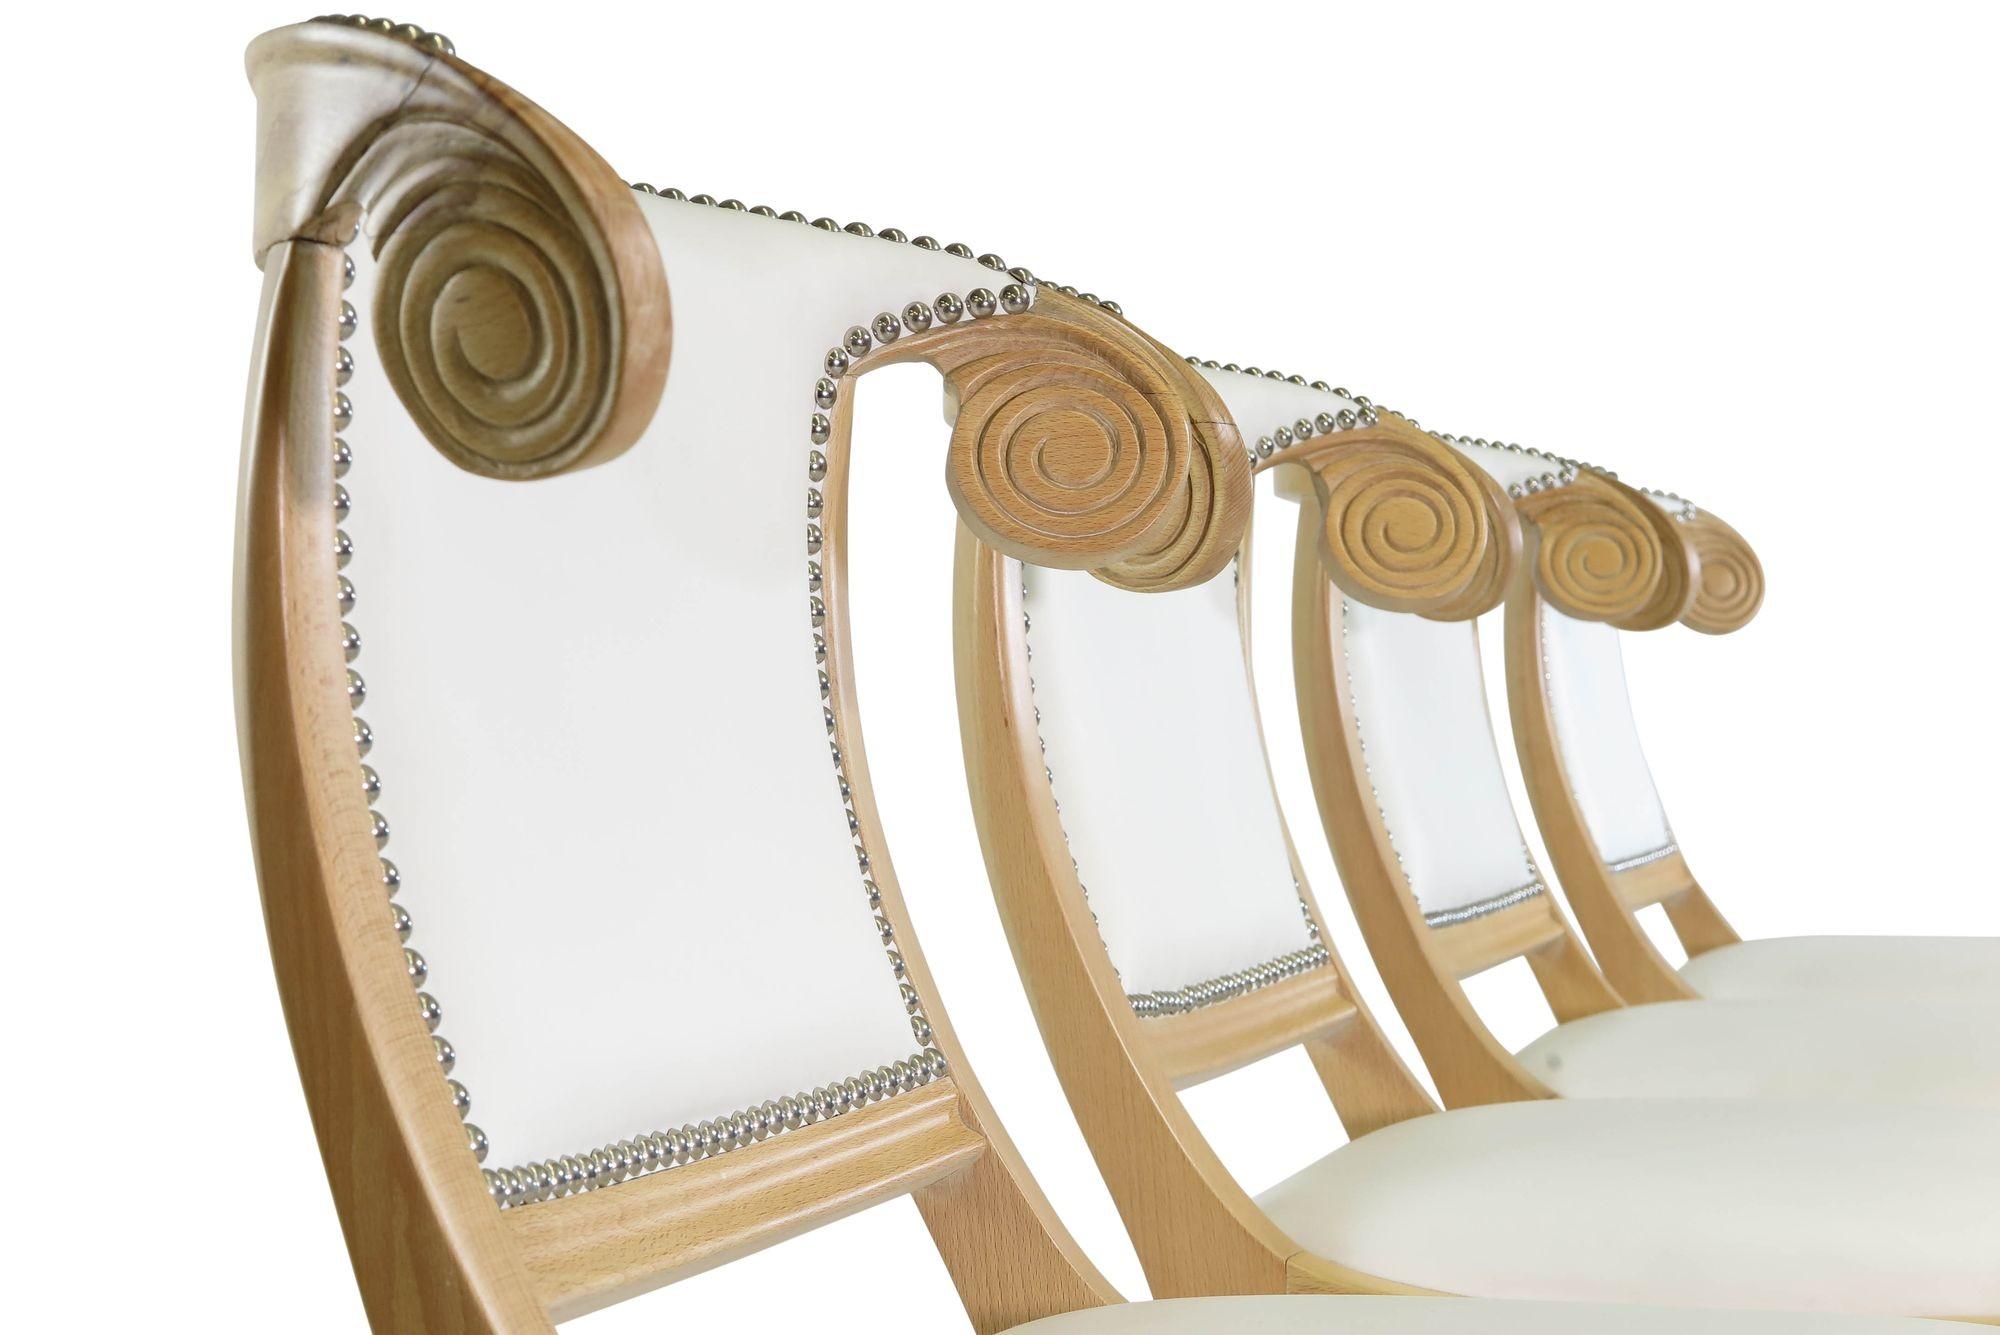 1940's Mid century Hollywood Regency dining chairs crafted of solid beechwood frames with decorative spiral backs and flared sabre legs. The chairs frames are fully restored and upholstered in white leather, trimmed with polished chrome